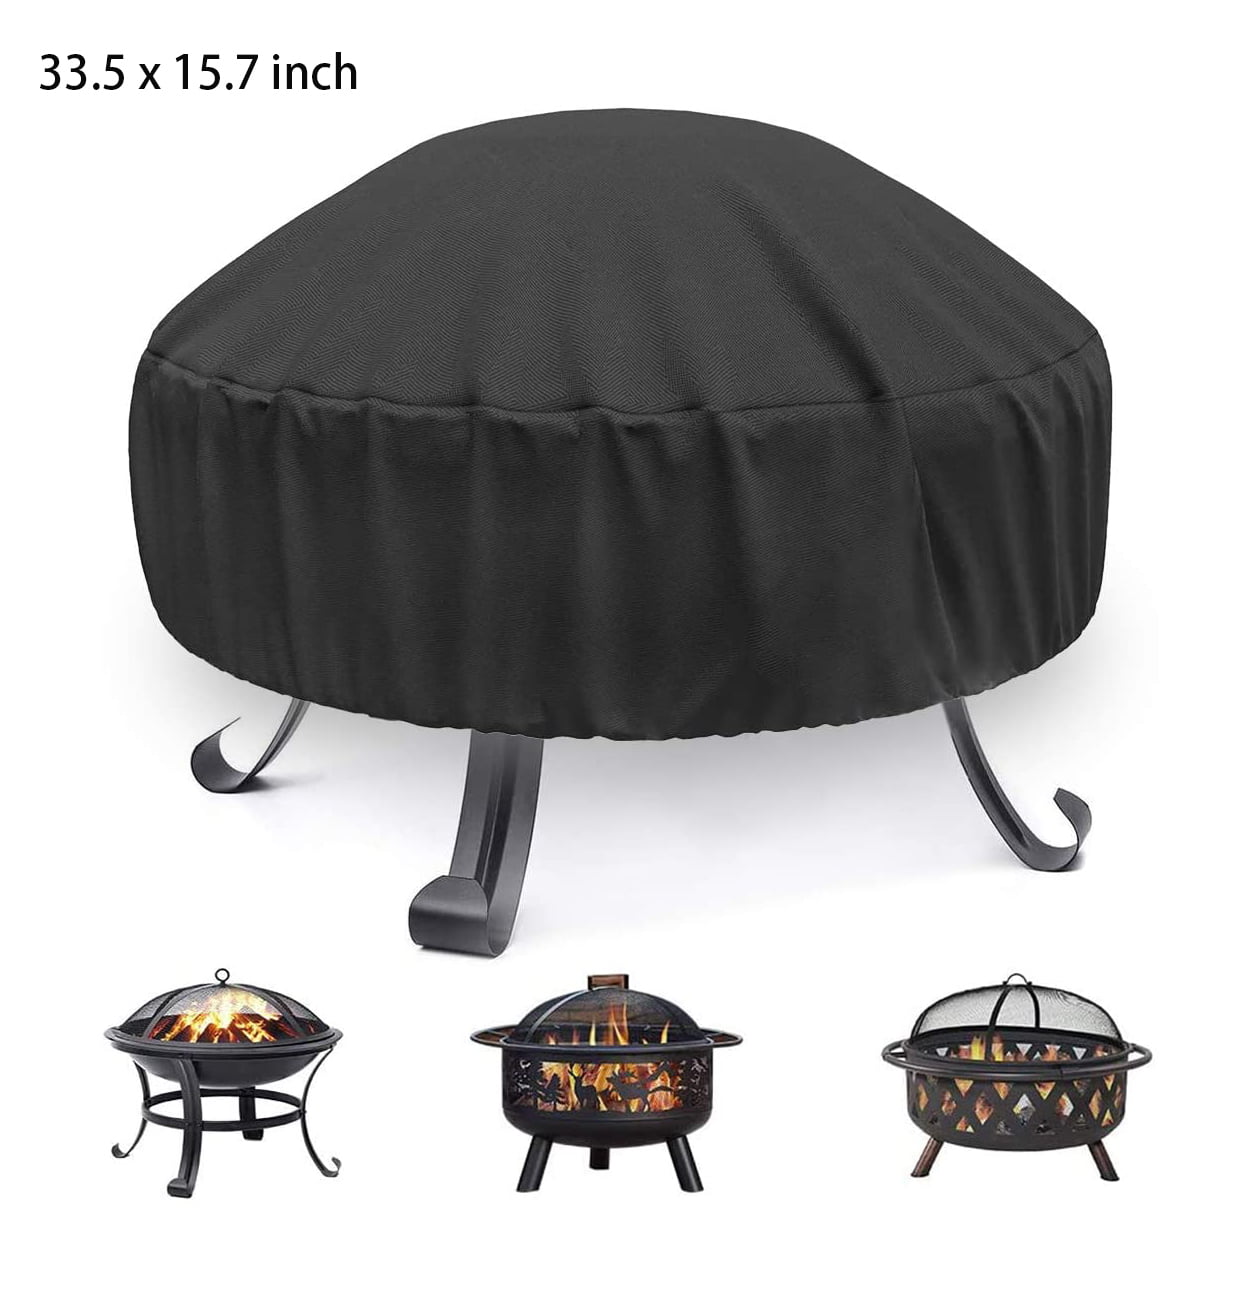 Round Fire Pit Cover Outdoor For Yard Patio Grill BBQ Dust Protection Waterproof 